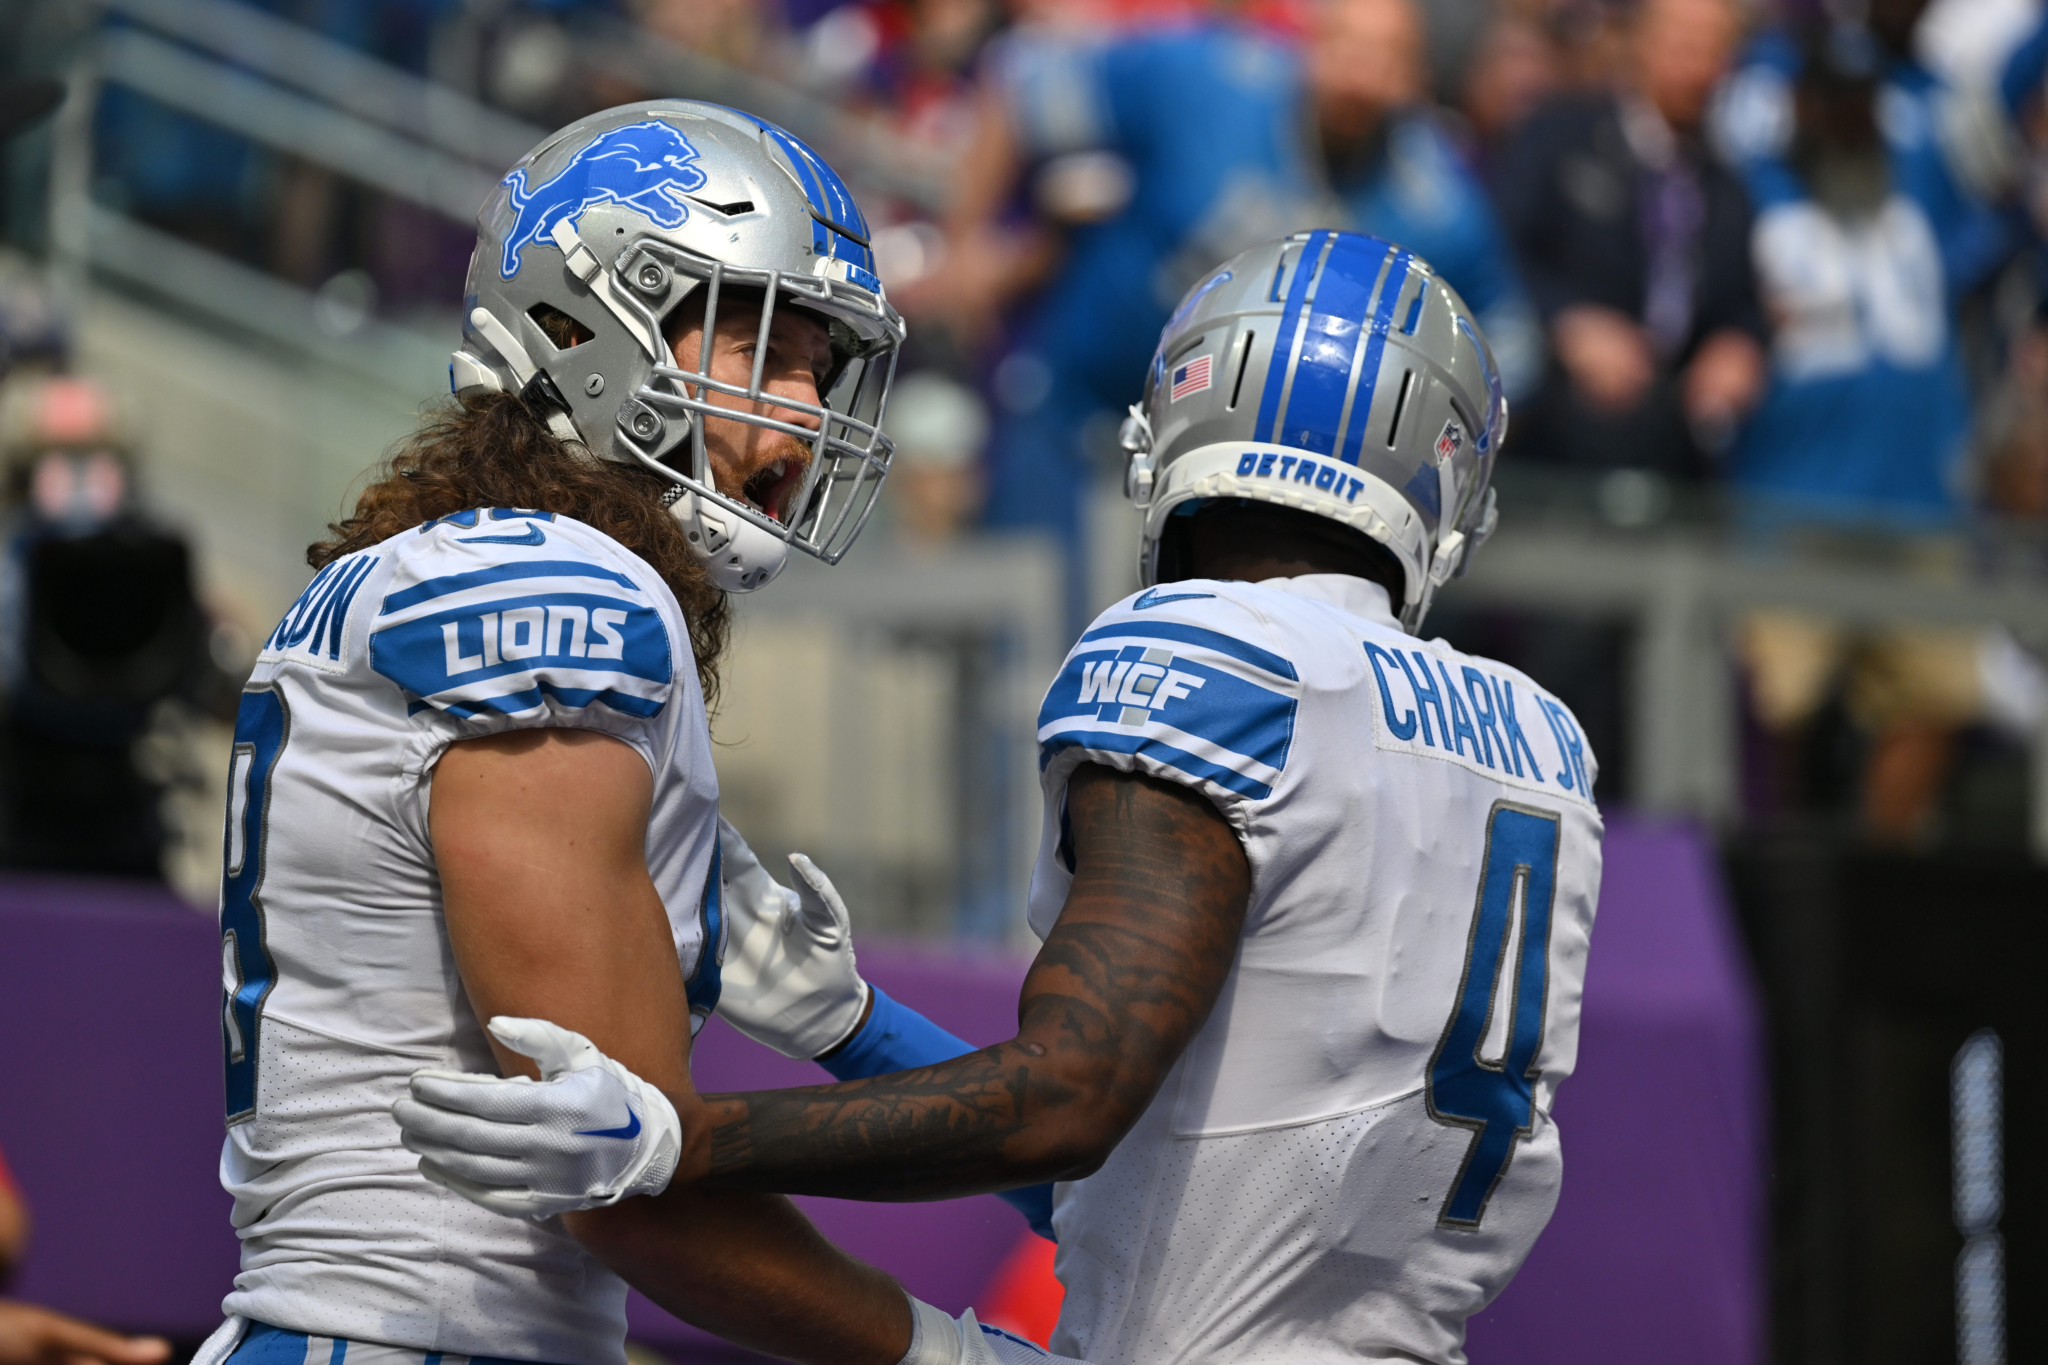 Detroit Lions schedule Riding high heading into Week 10 against the Bears